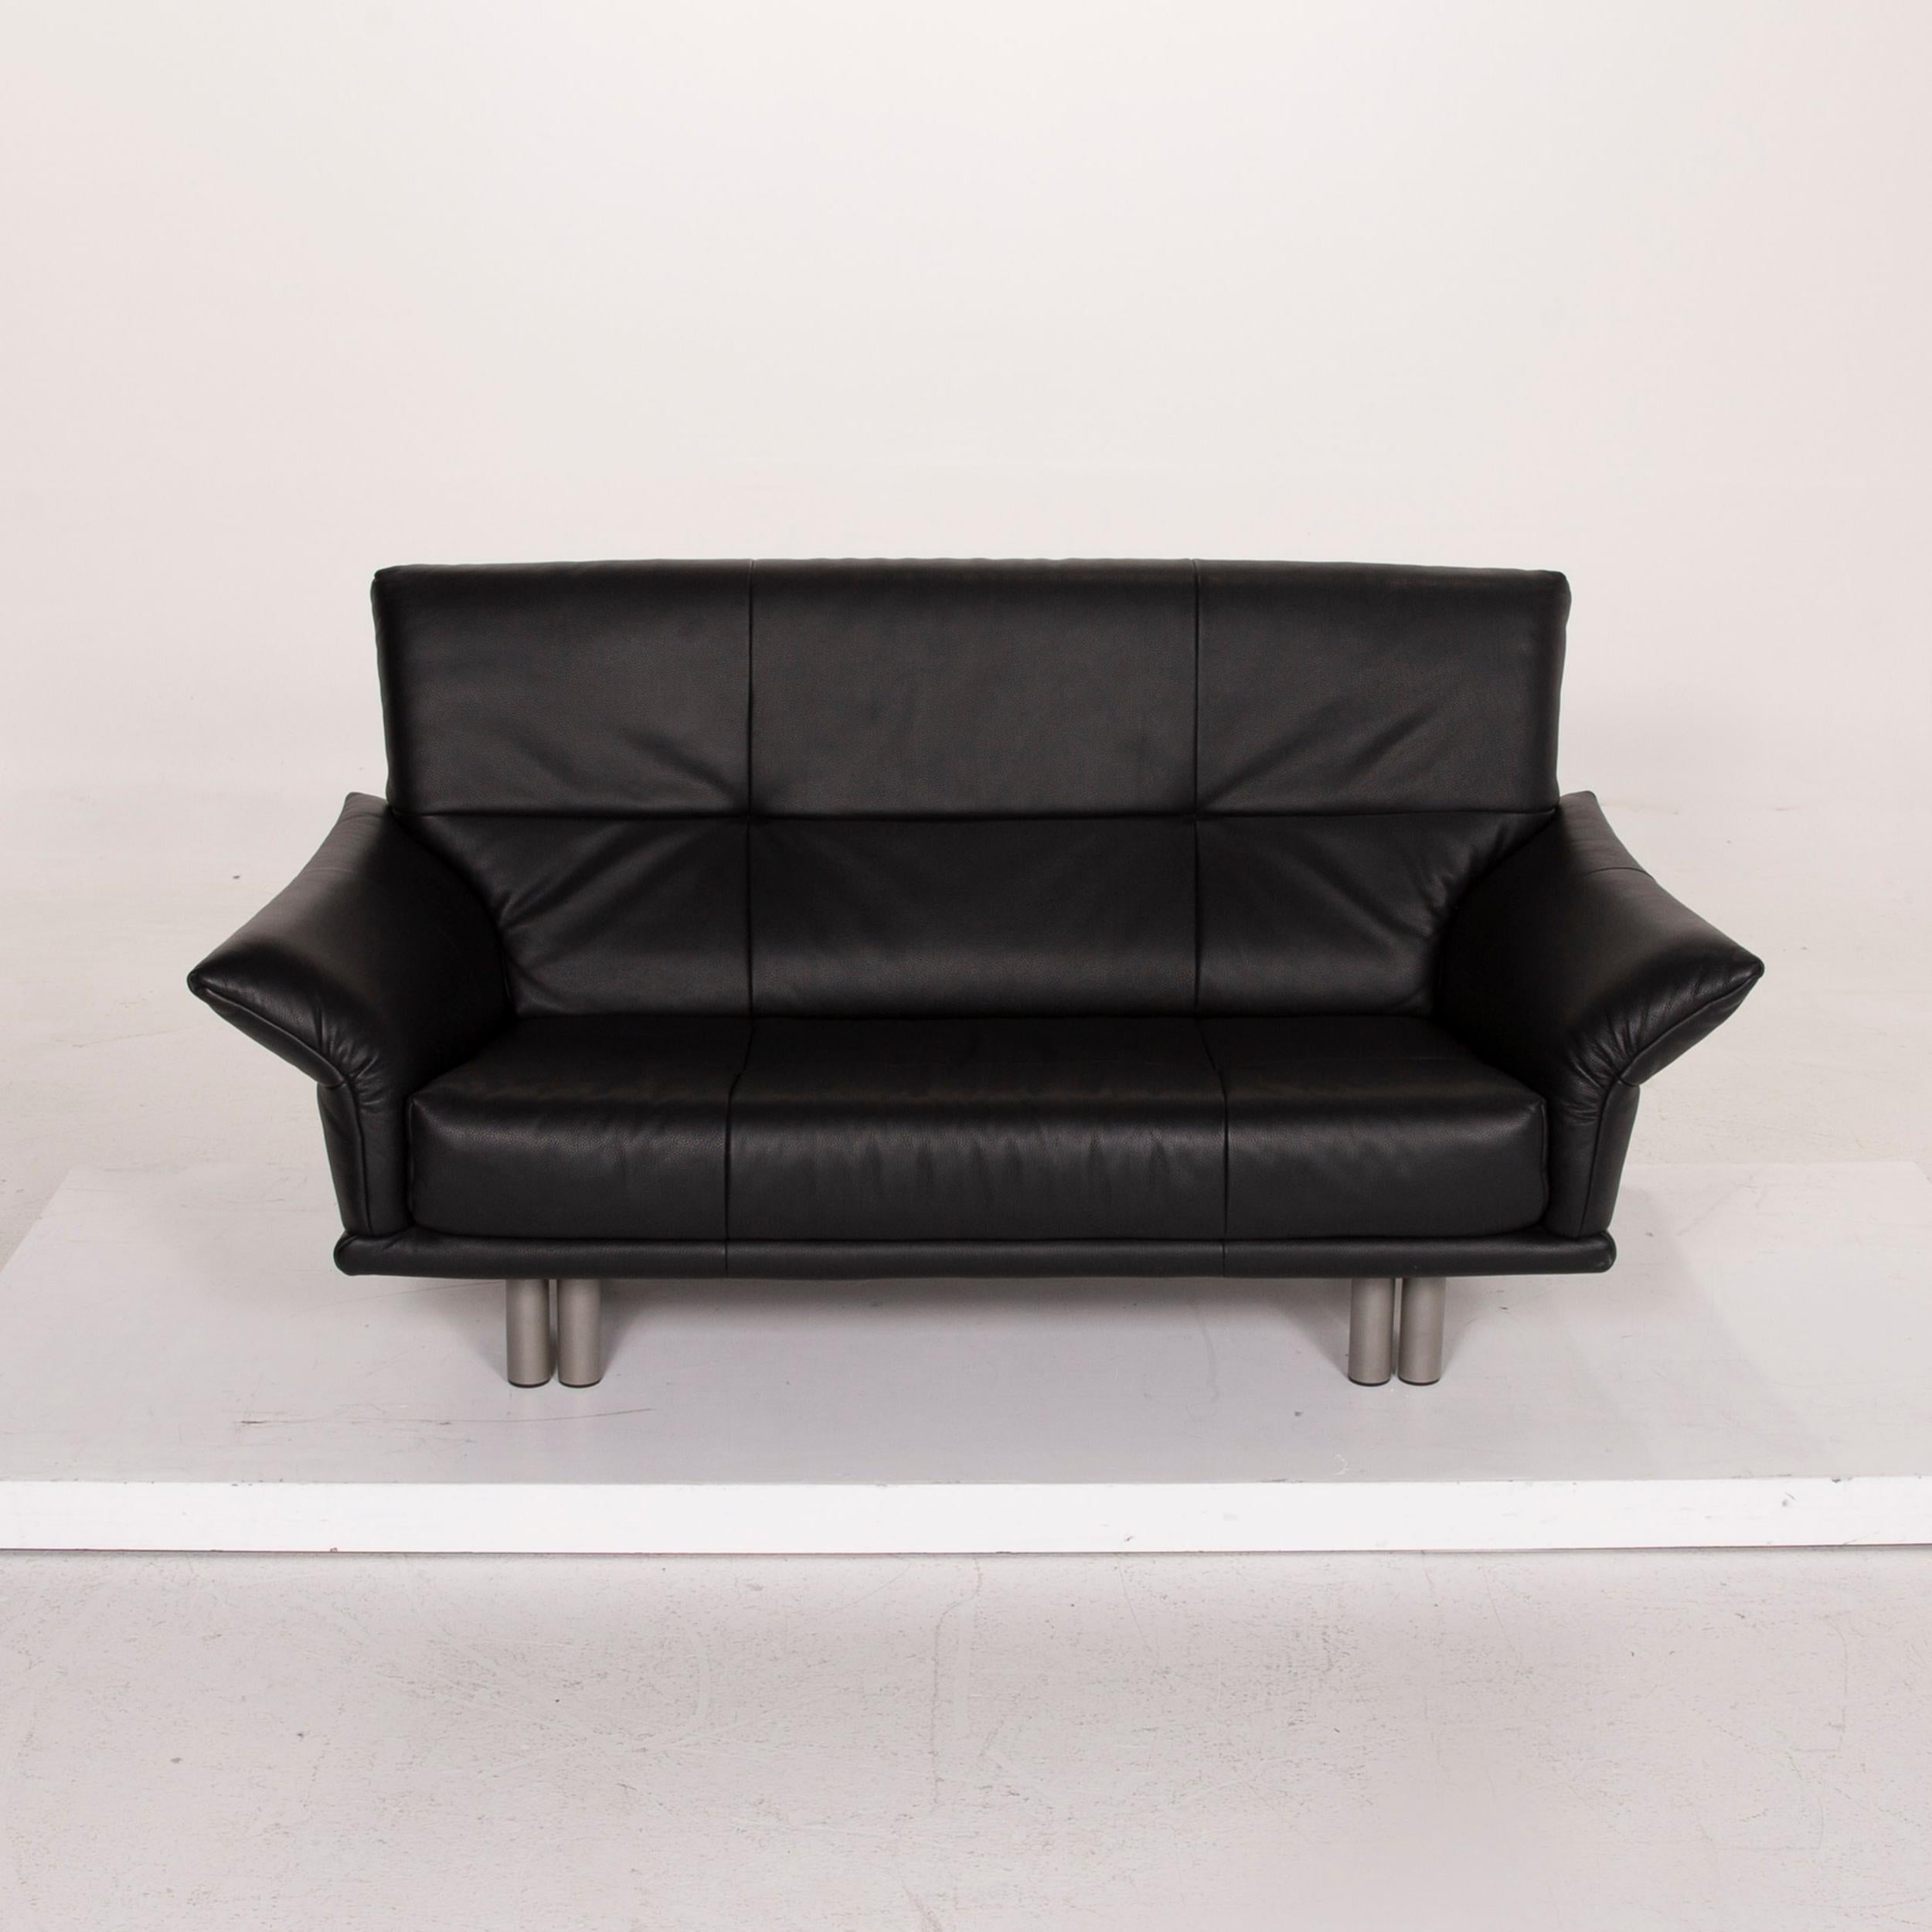 Rolf Benz Leather Sofa Black Two-Seat For Sale 1